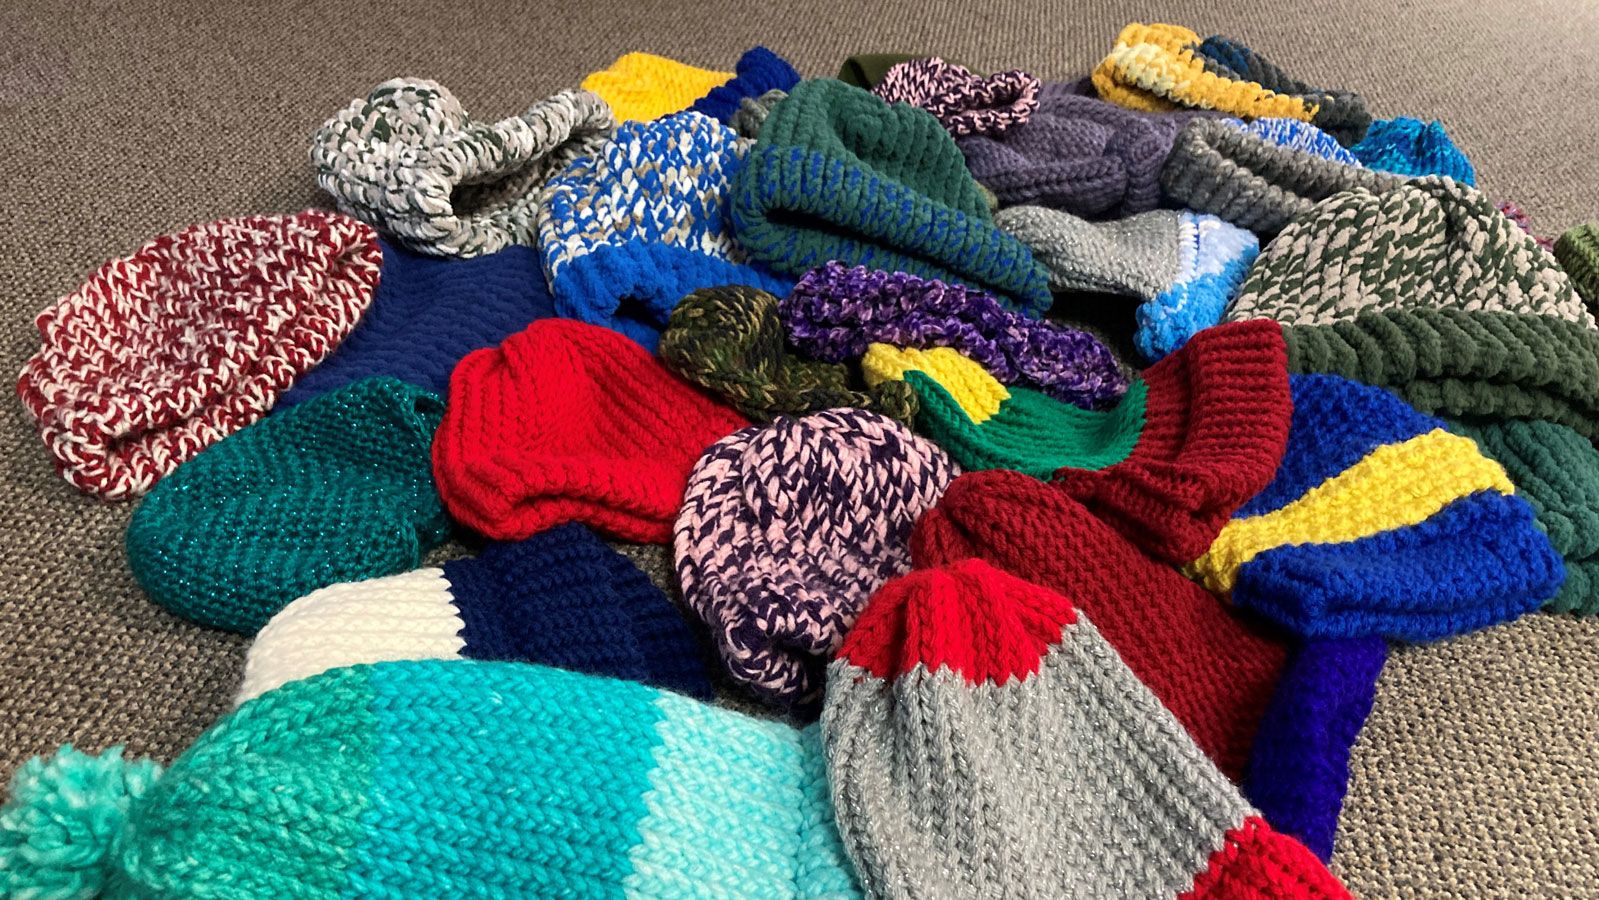 Toques made by the men in the knitting club.